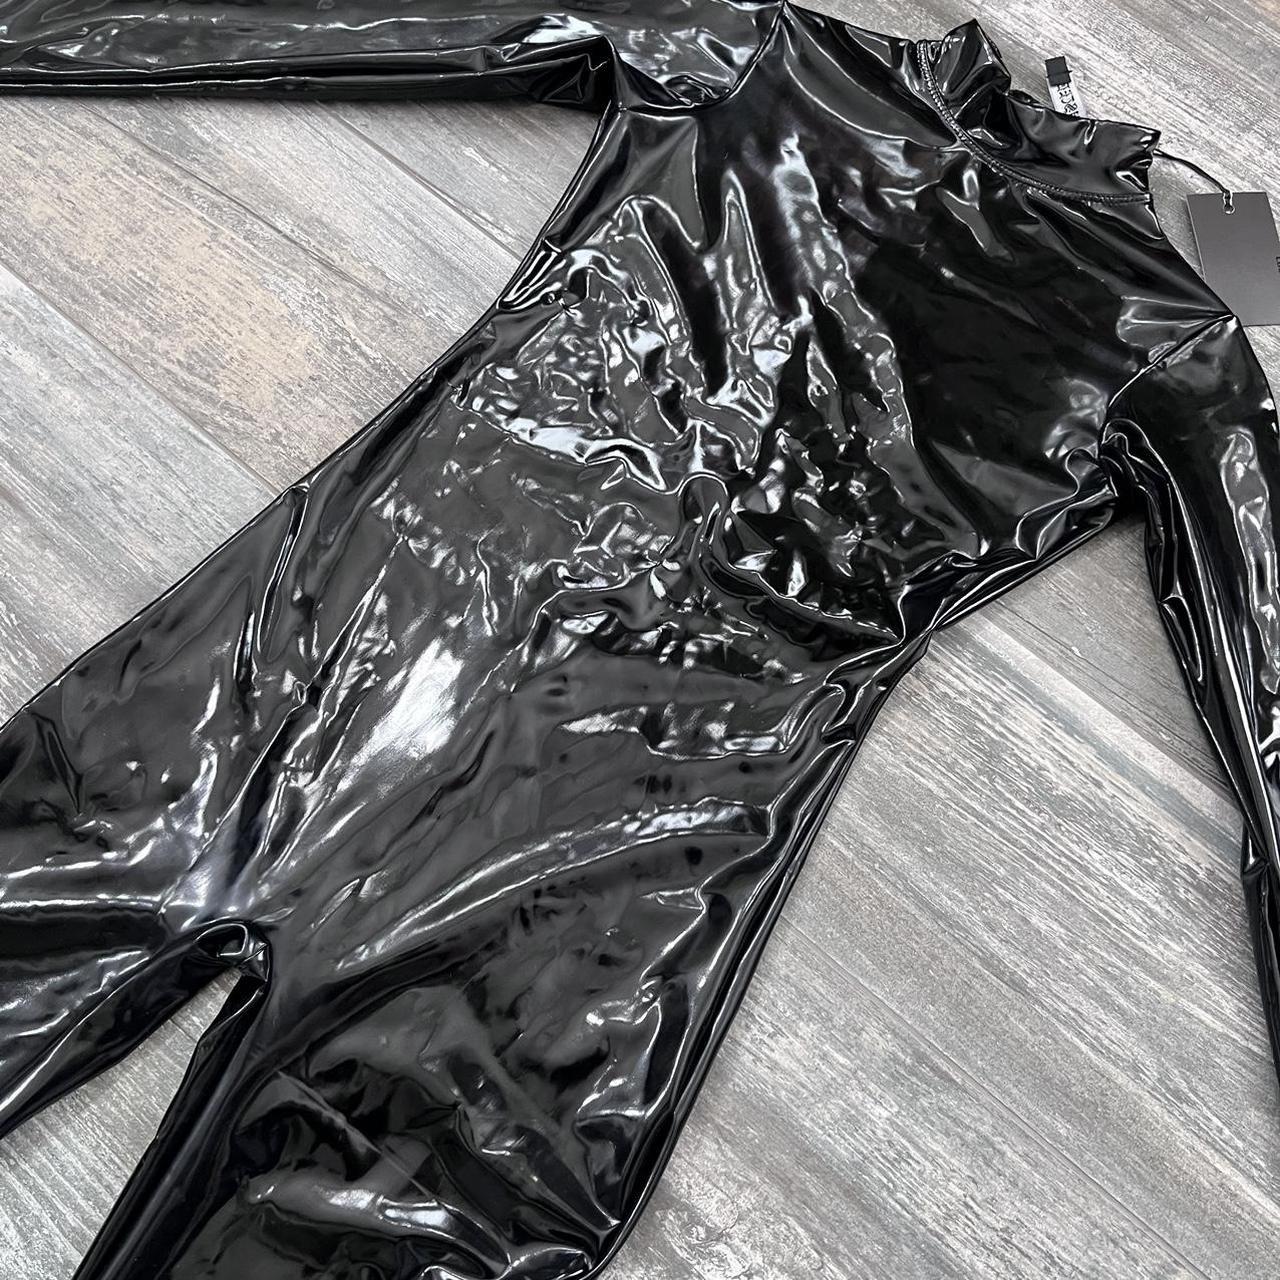 Pvc Catsuit – bustedbrand